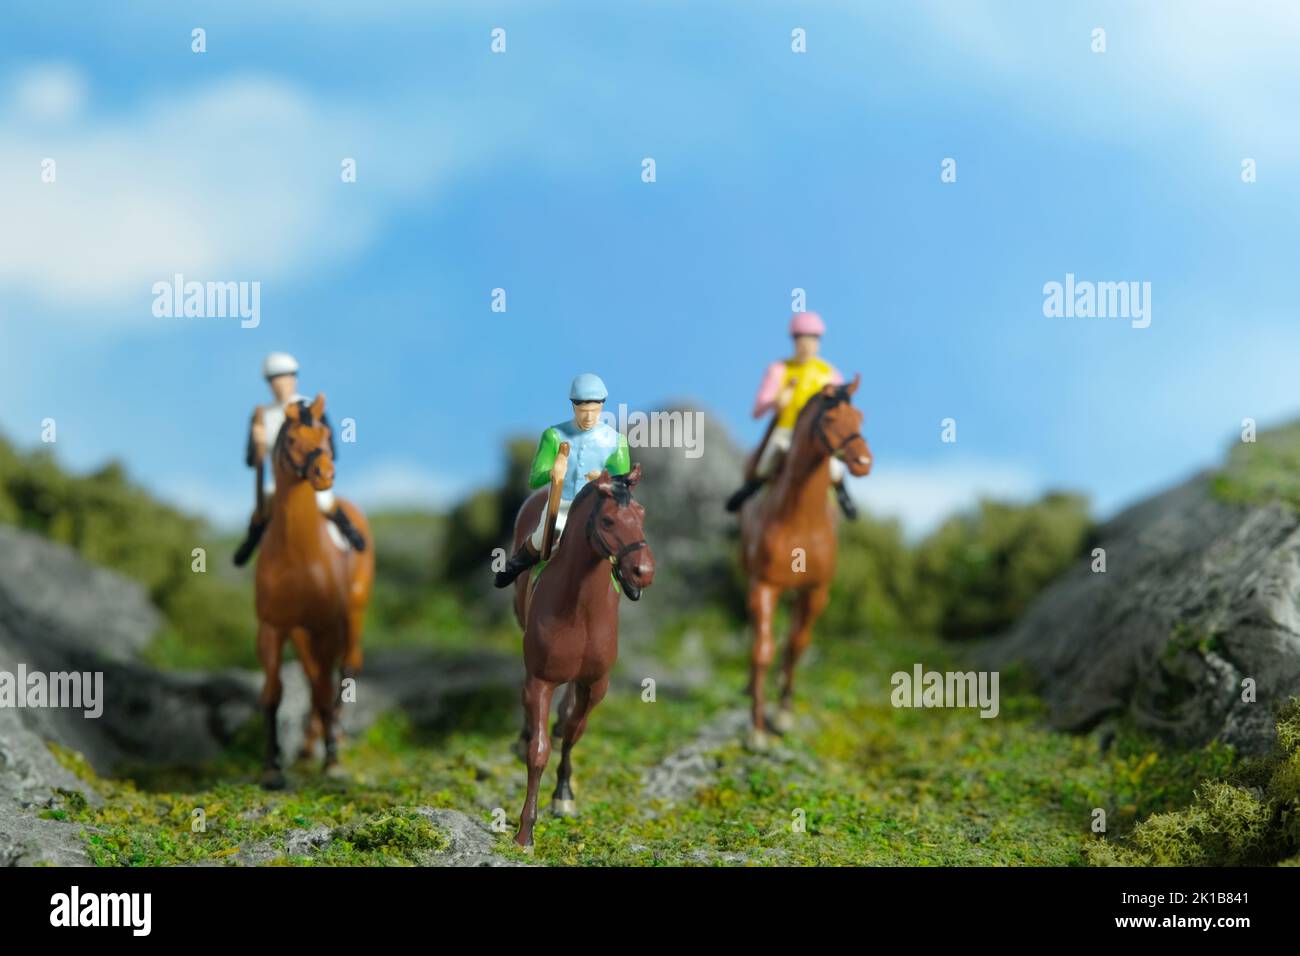 Miniature people toy figure photography. A jockey man riding horse at mountain hill for training. Image photo Stock Photo